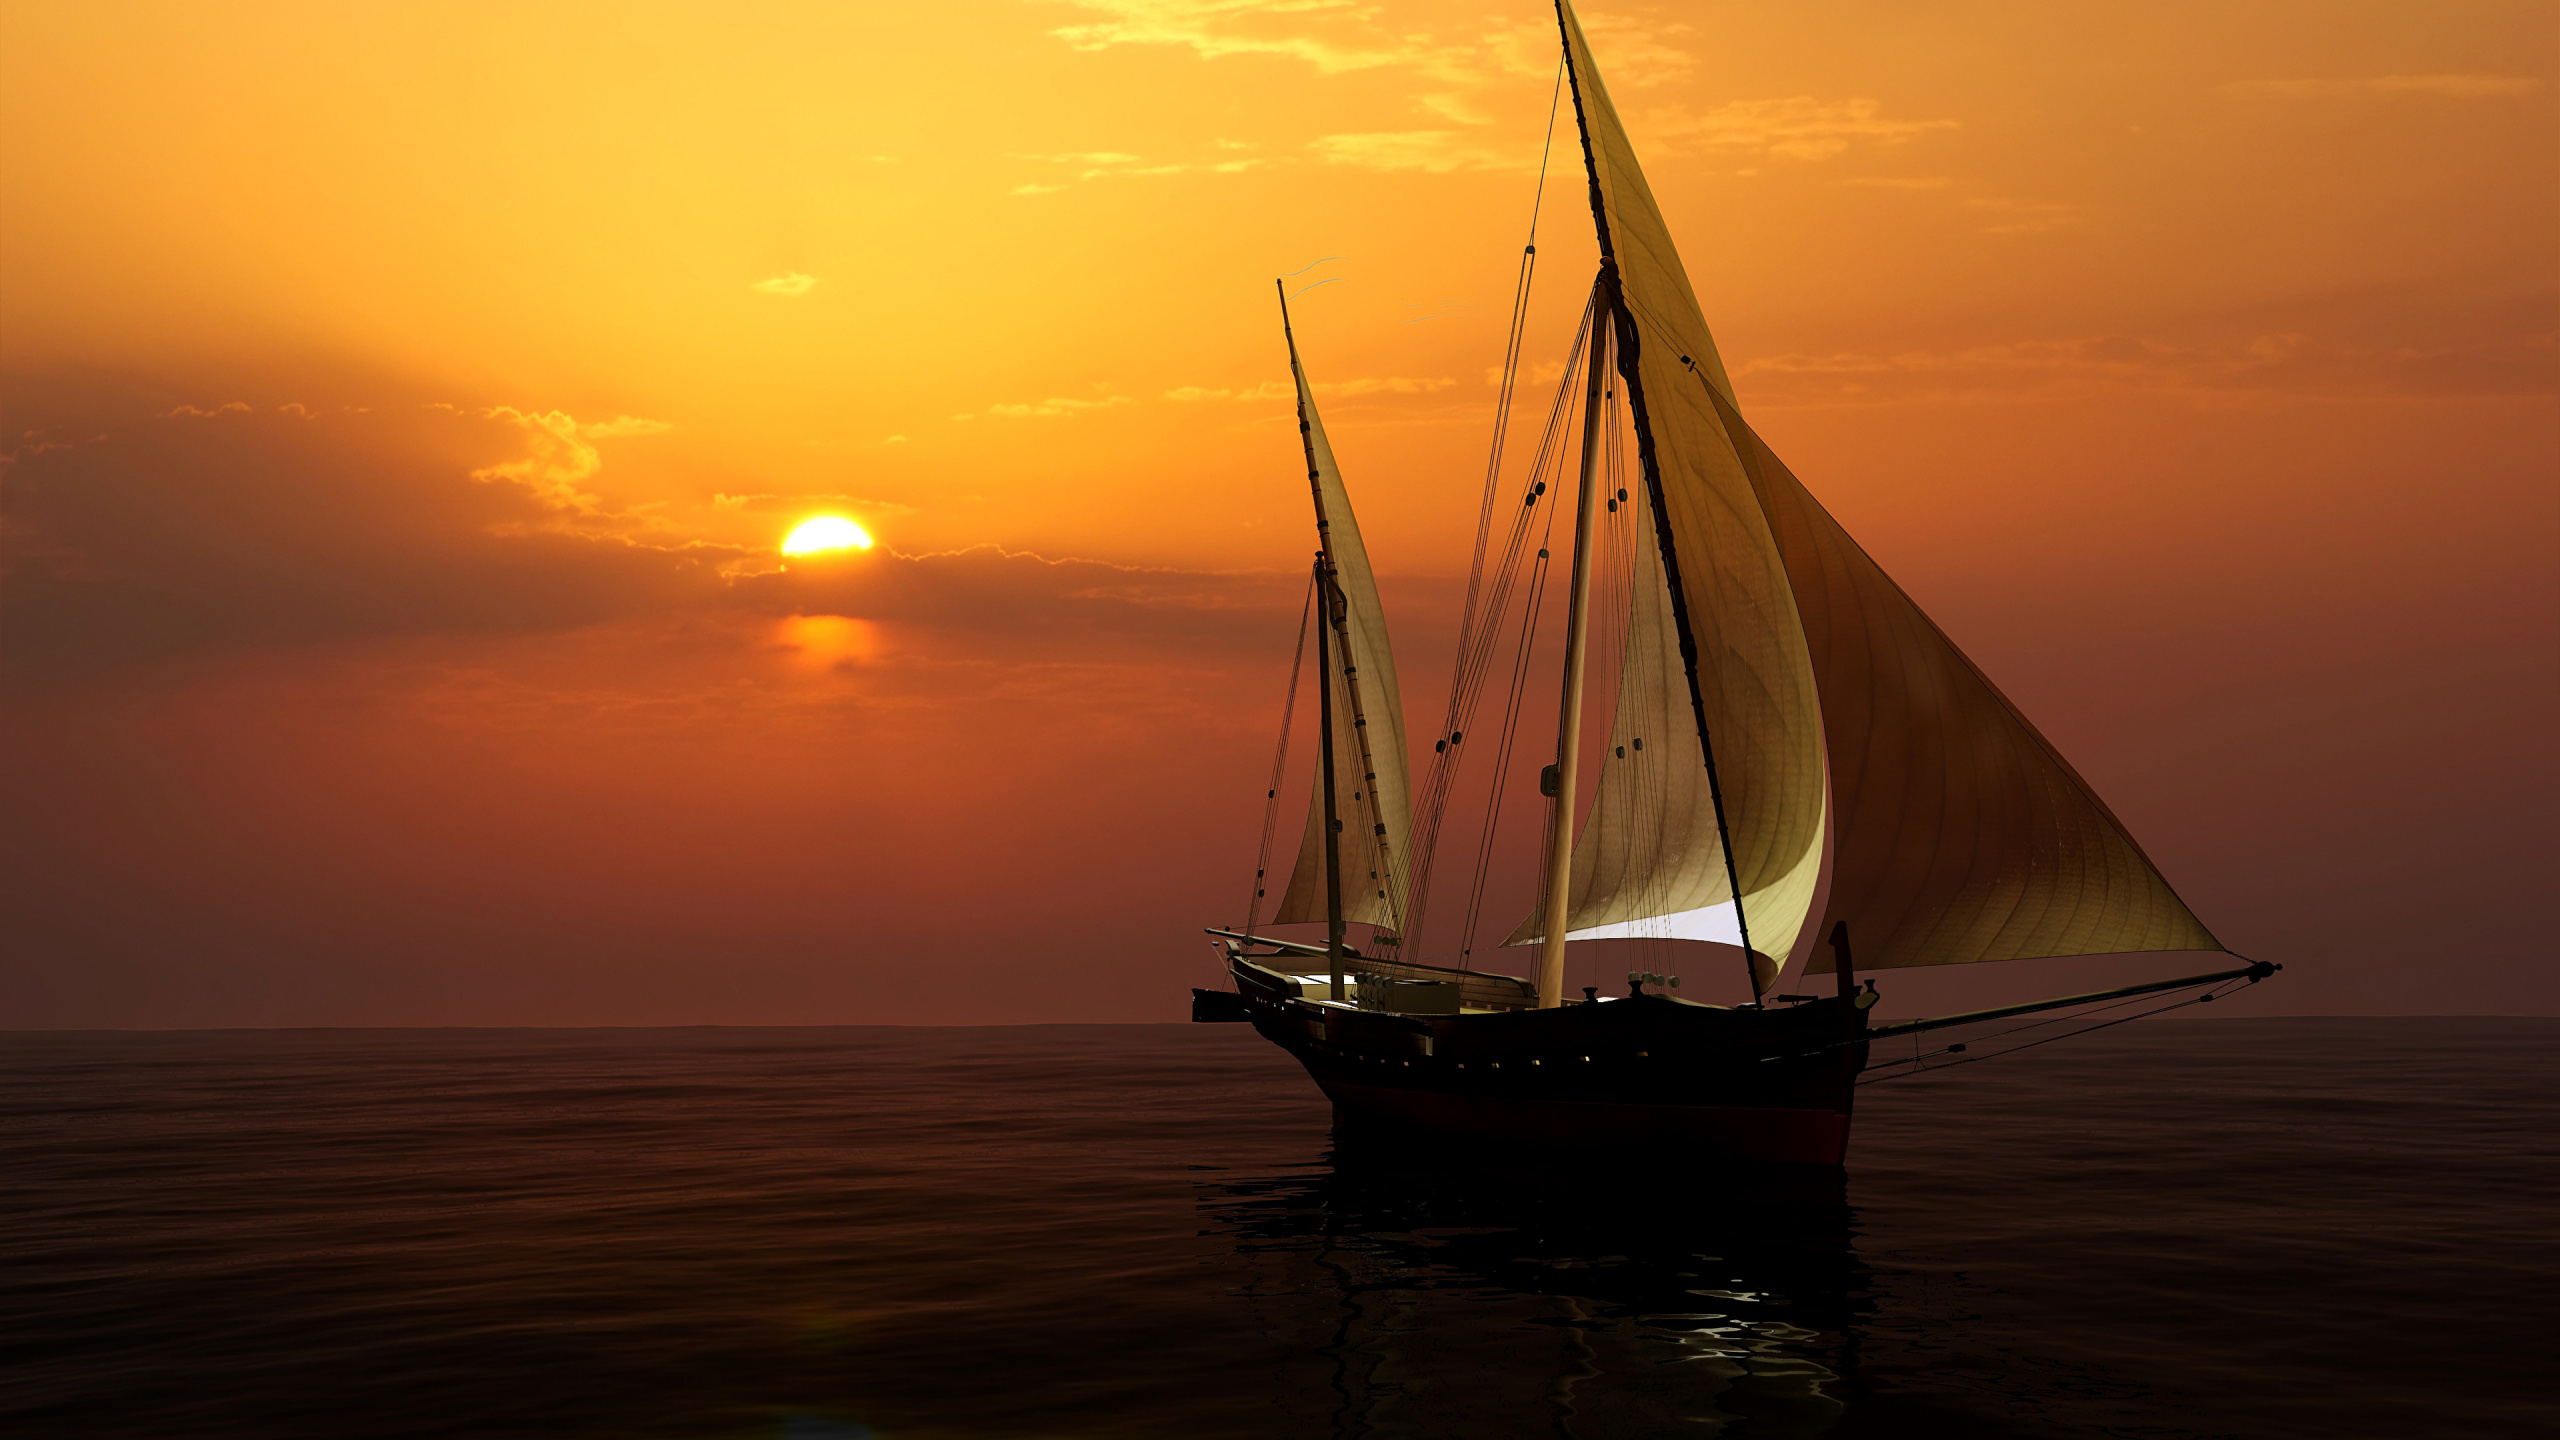 Silhouette of Boat on Sea During Sunset. Wallpaper in 2560x1440 Resolution